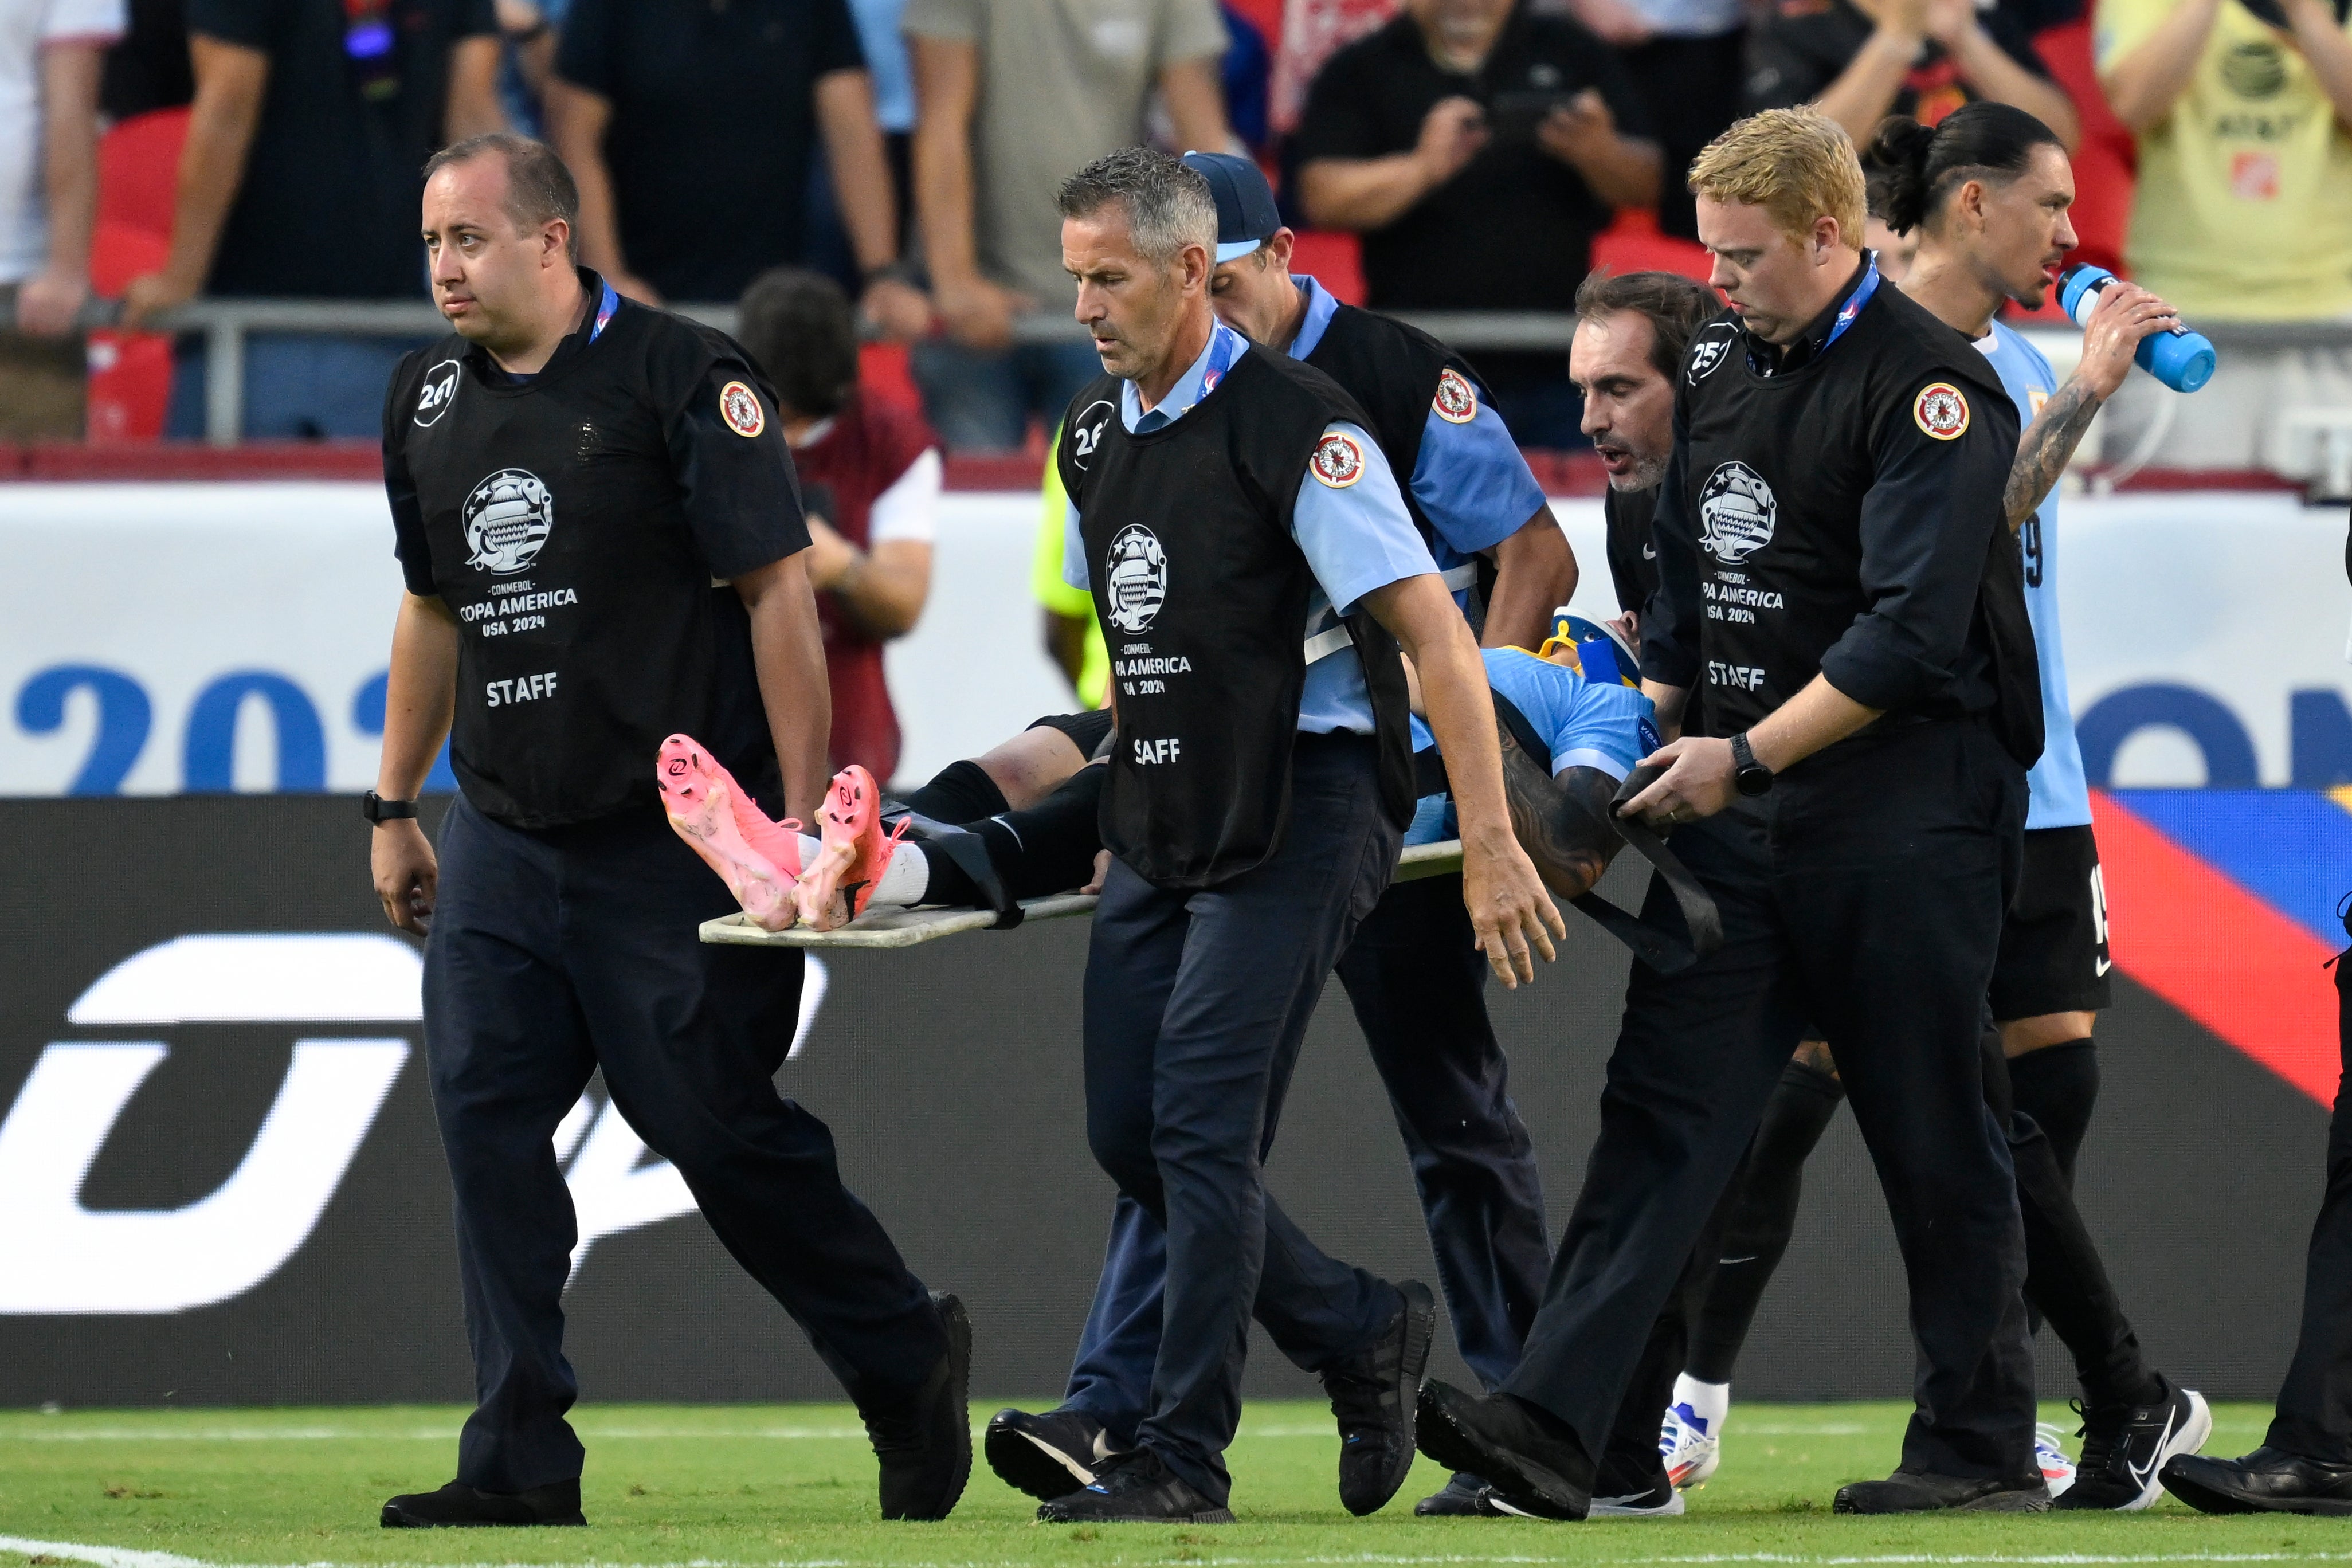 Uruguayan player Maximiliano Araujo is taken off the field on a stretcher after his head collided with defender Tim Ream during a match against the US in Group C of the Copa América, on Monday, July 1, 2024, in Kansas City, Missouri